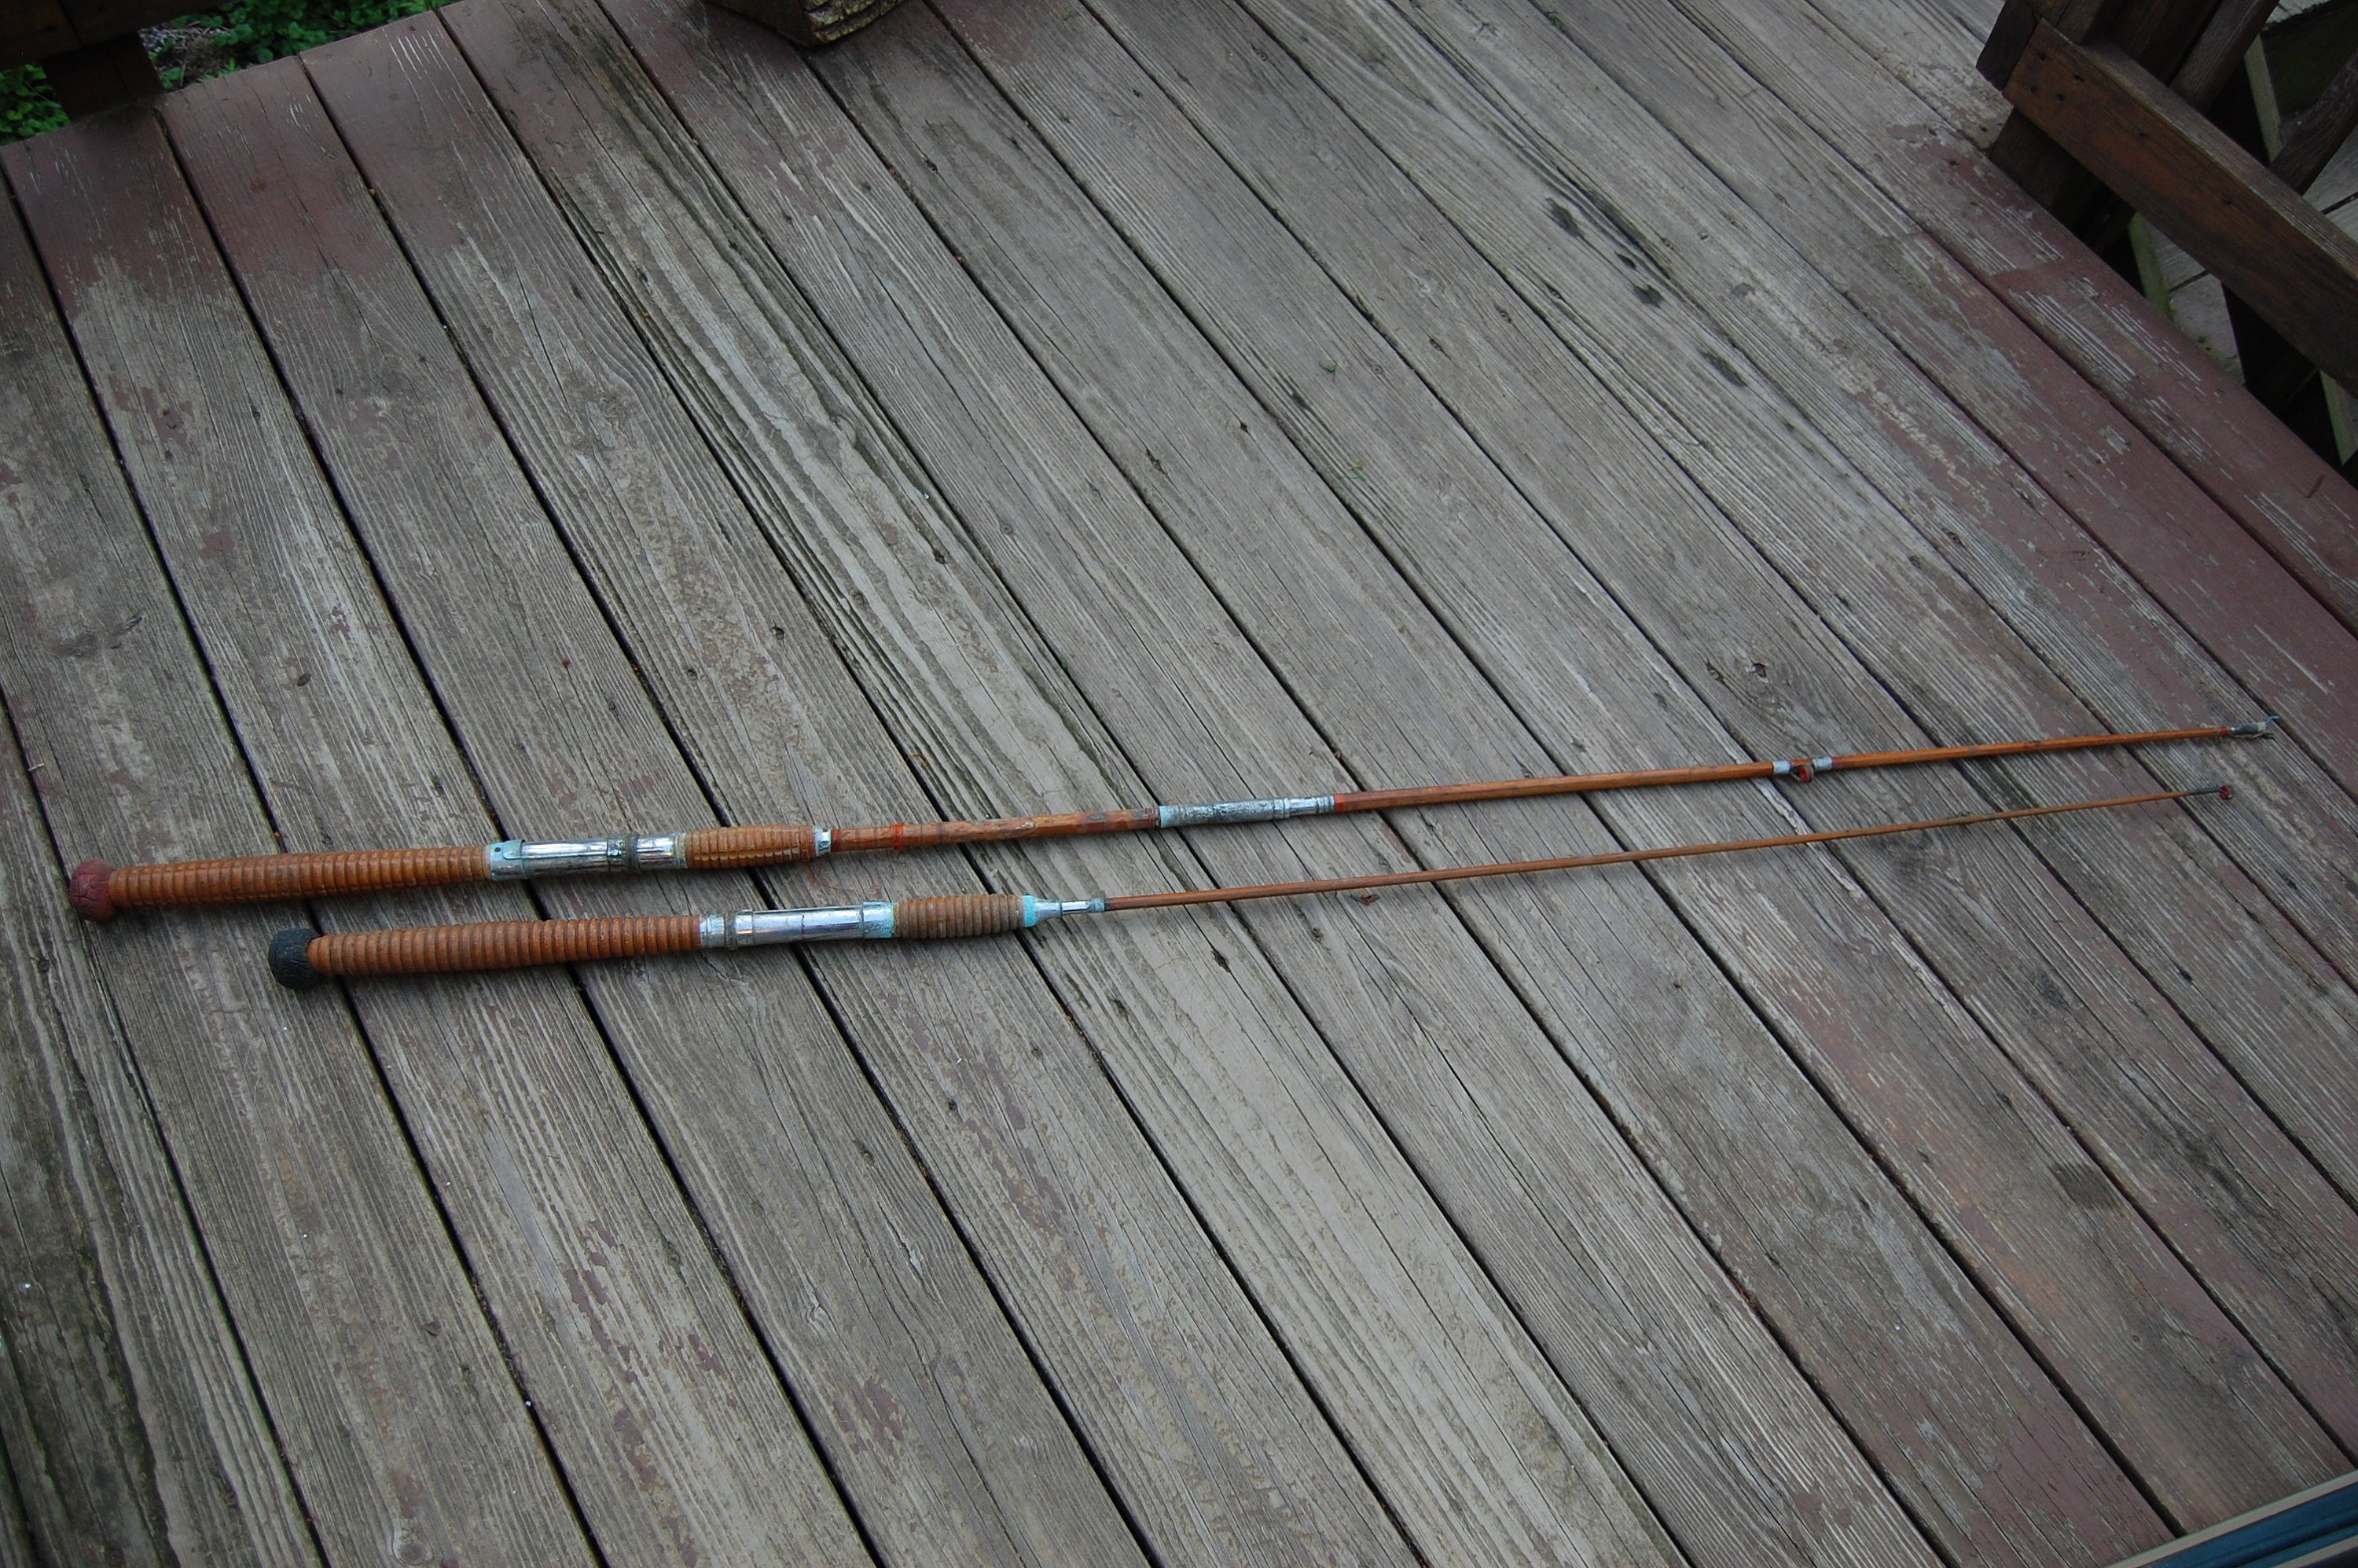 Antique Turned Wood Fishing Rods Poles 2 Vintage Boat Fishing Rods Vintage  Salt Water Fishing Poles Rods Macy's Fishing Pole 